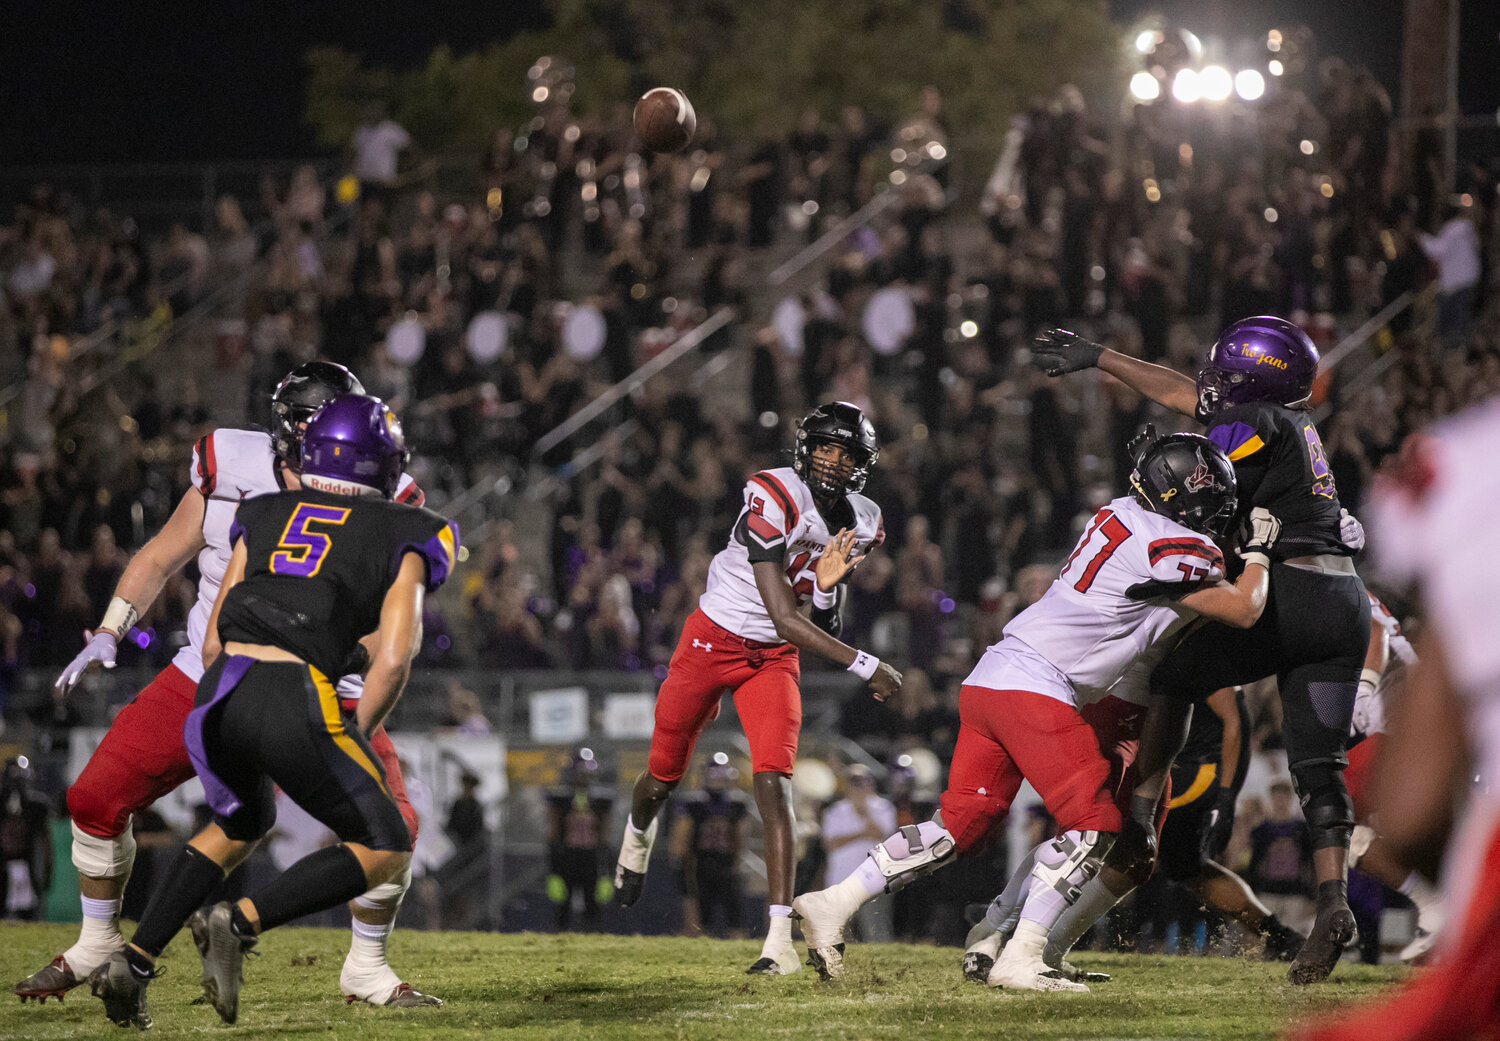 Toro sophomore quarterback Aaden Shamburger fires a throw during the second half of Spanish Fort’s rivalry game against the Daphne Trojans on the road Friday, Sept. 29. Shamburger threw three touchdown passes in the second half to help spurn the Toros’ comeback as part of a 35-27 victory.